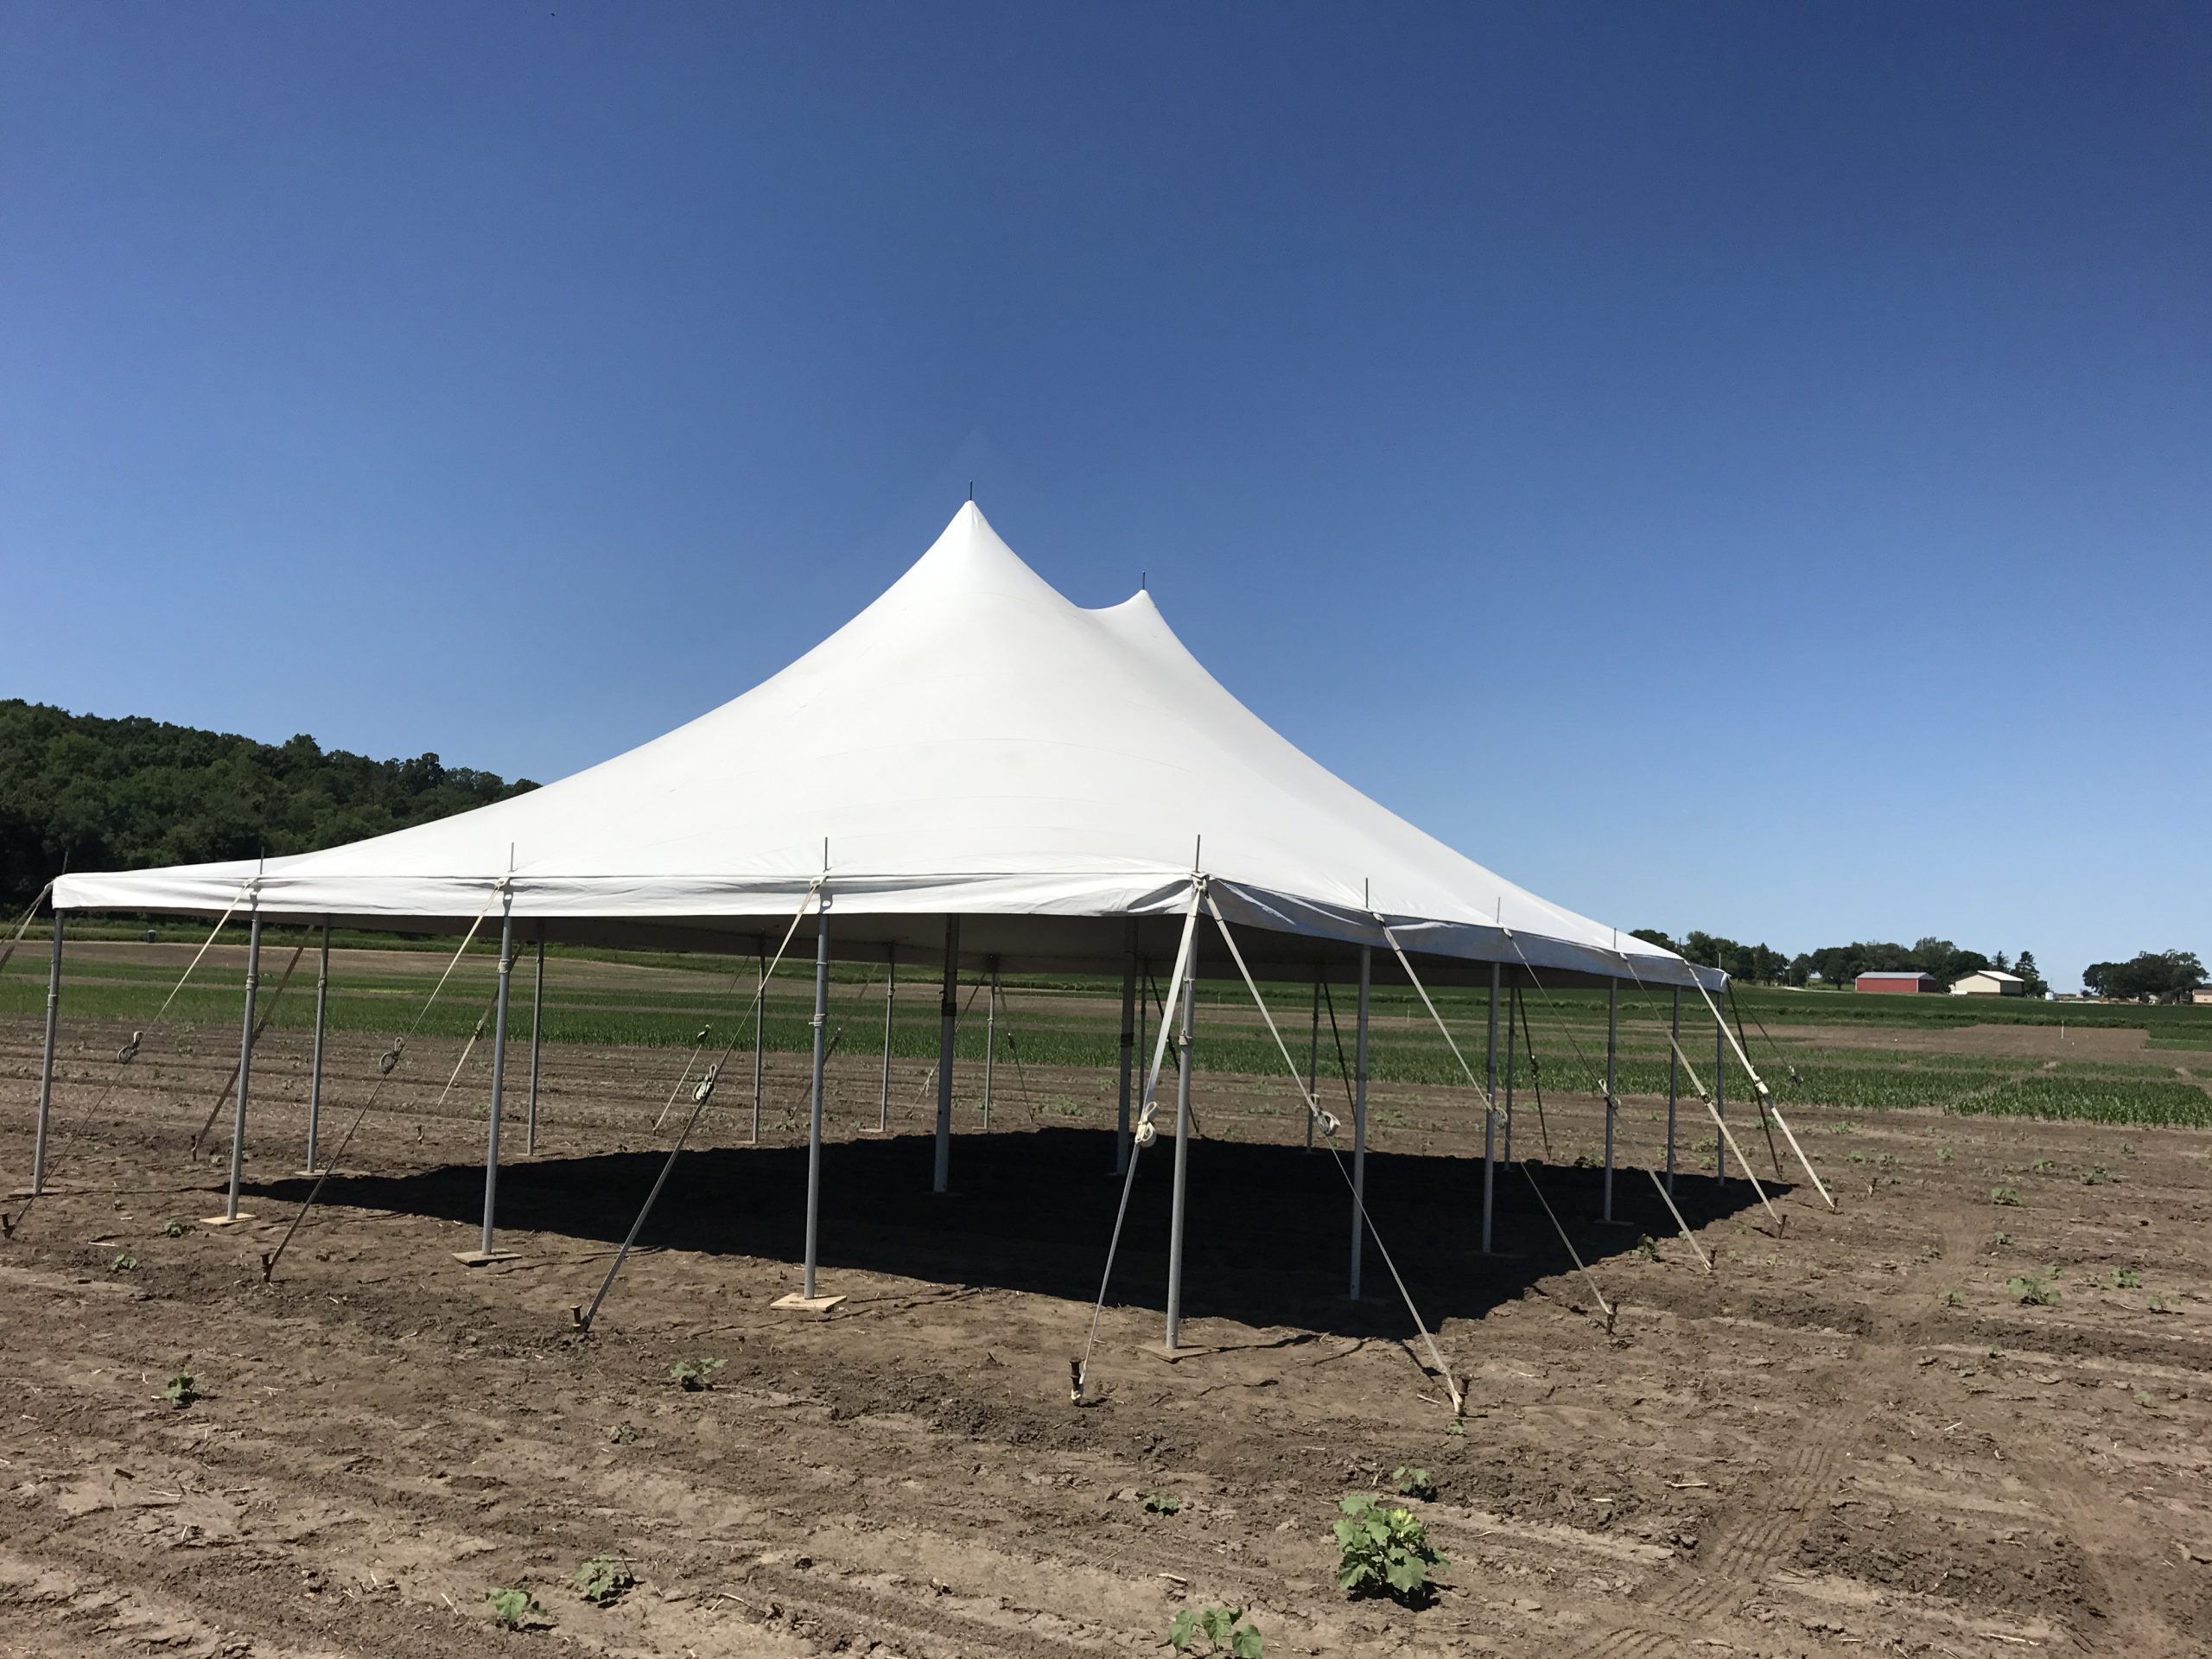 30' x 30' rope and pole tent for Monsanto Agrochemical Company in Marengo, Iowa